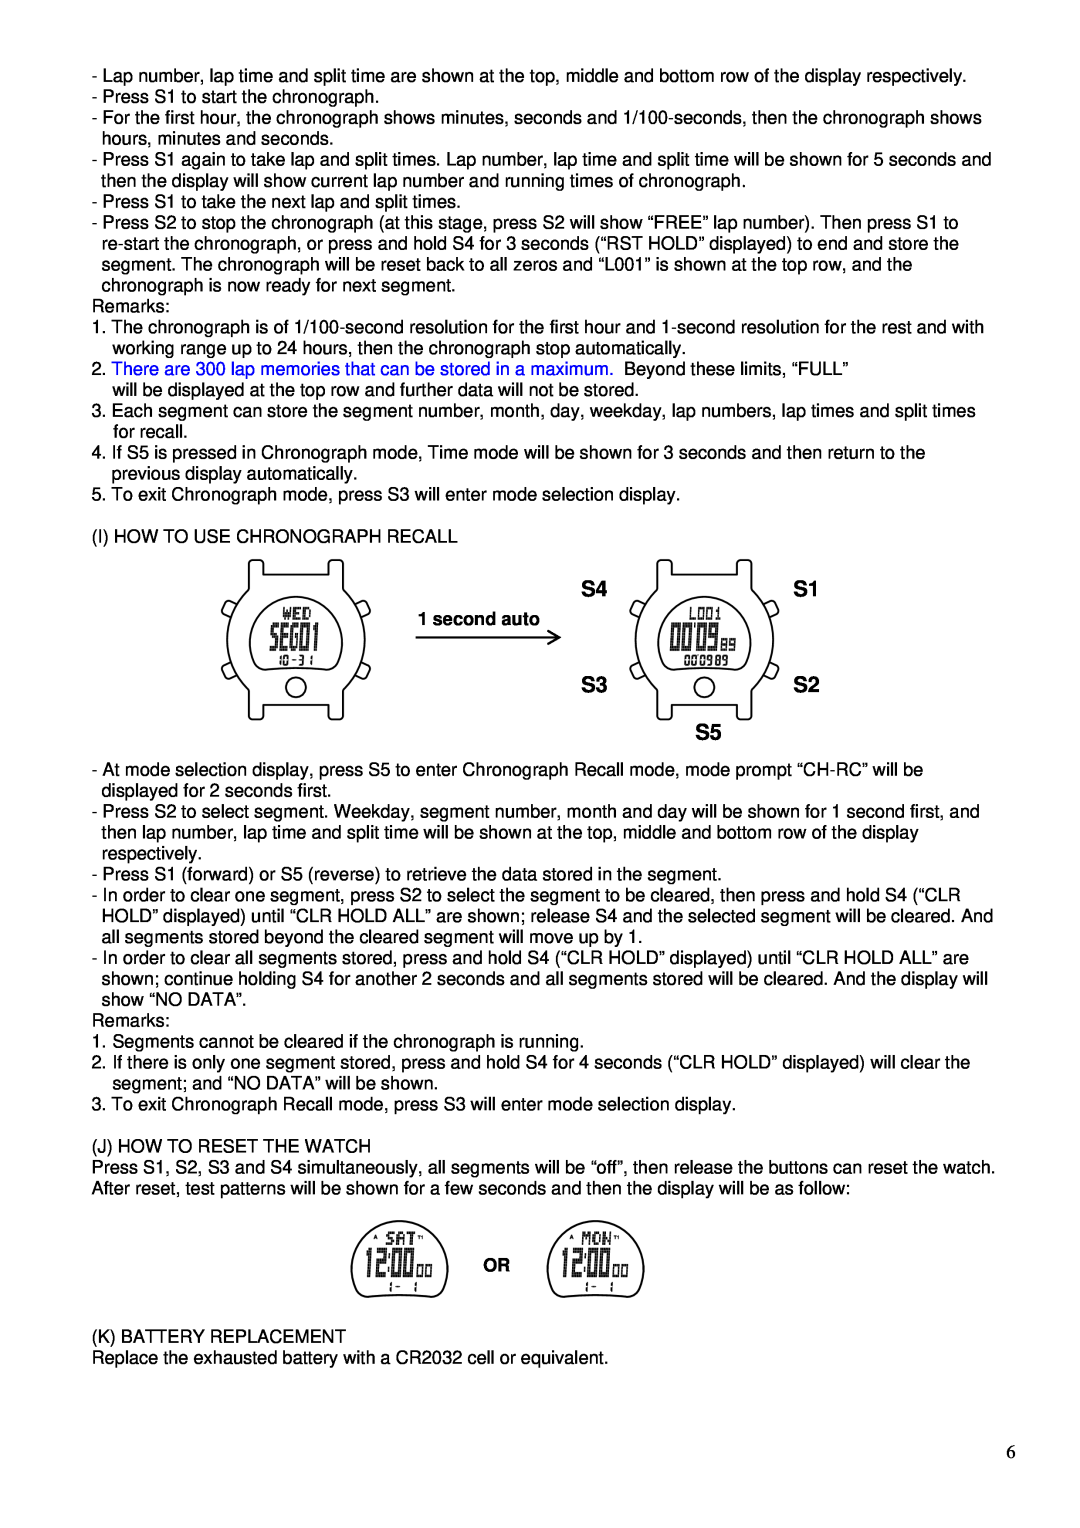 Robic SC-577 operating instructions S4S1, S3S2 S5, second auto 